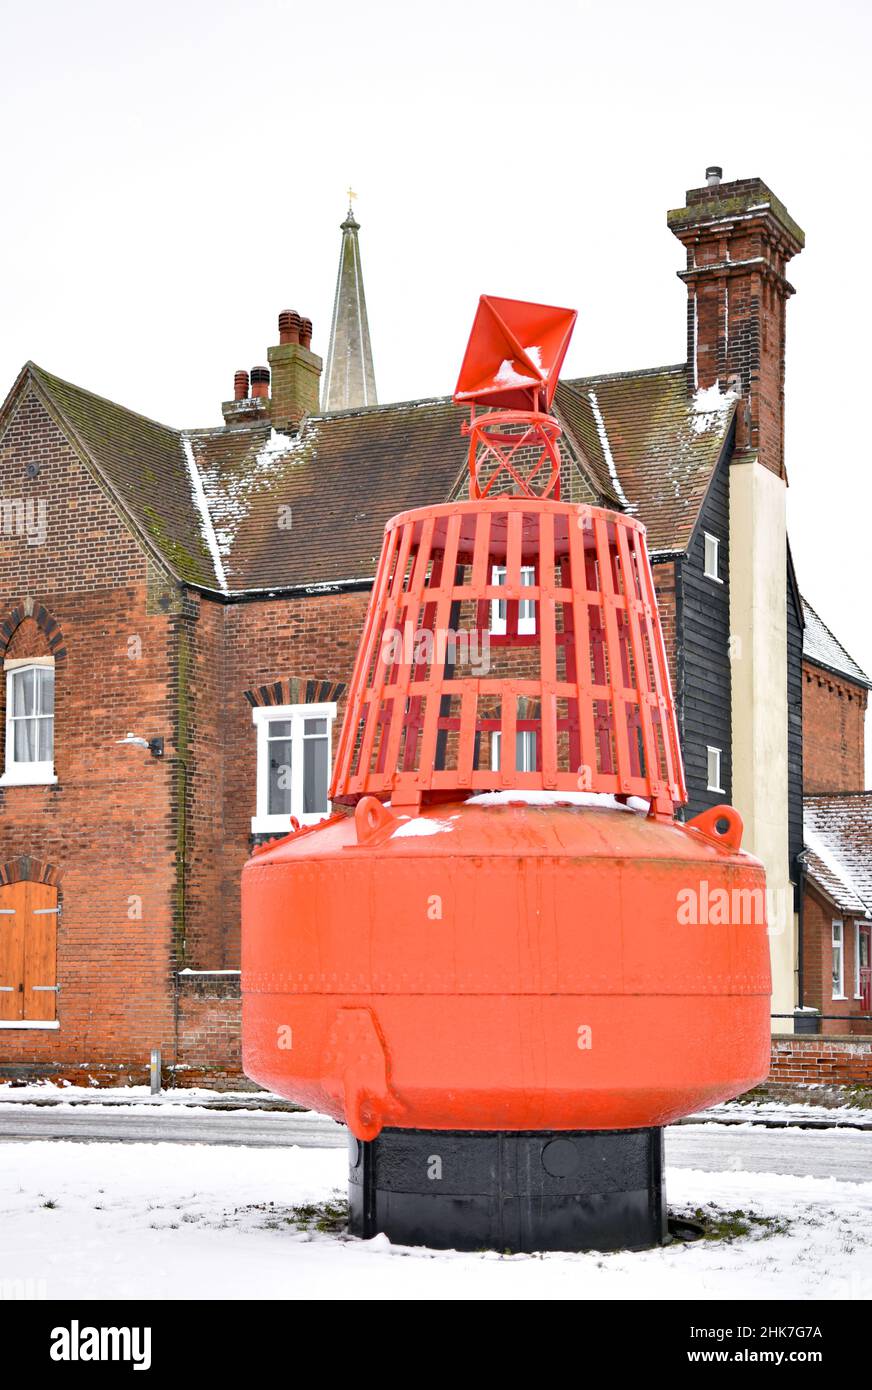 A large red buoy stands as a statue outside a historic house in the seaside town of Harwich, Essex, UK. The spire of St Nicholas Church is seen. Stock Photo